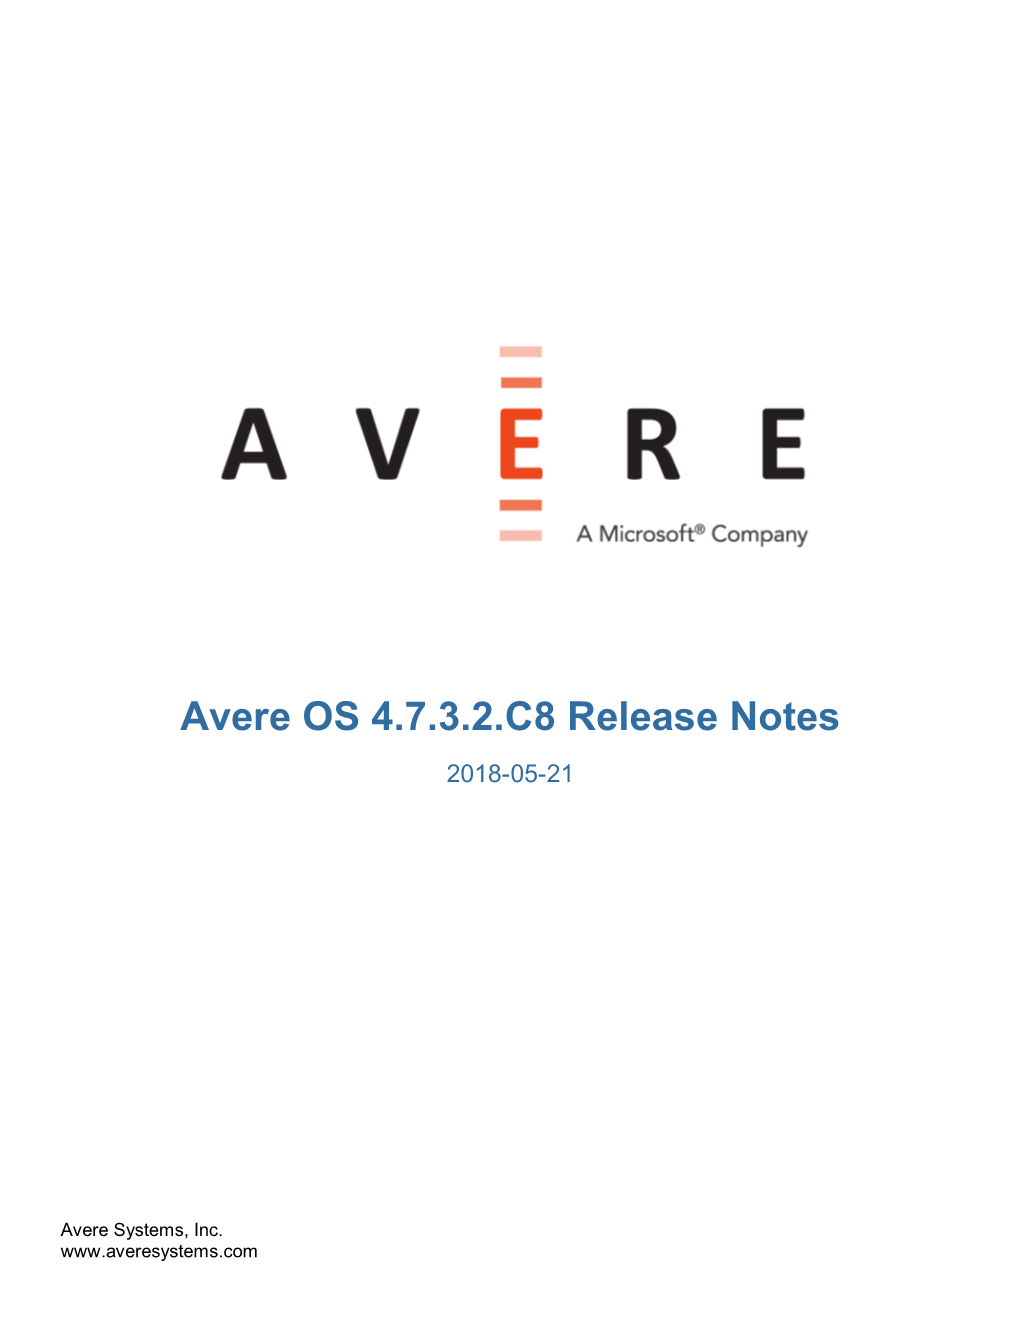 Avere OS 4.7.3.2.C8 Release Notes 2018-05-21